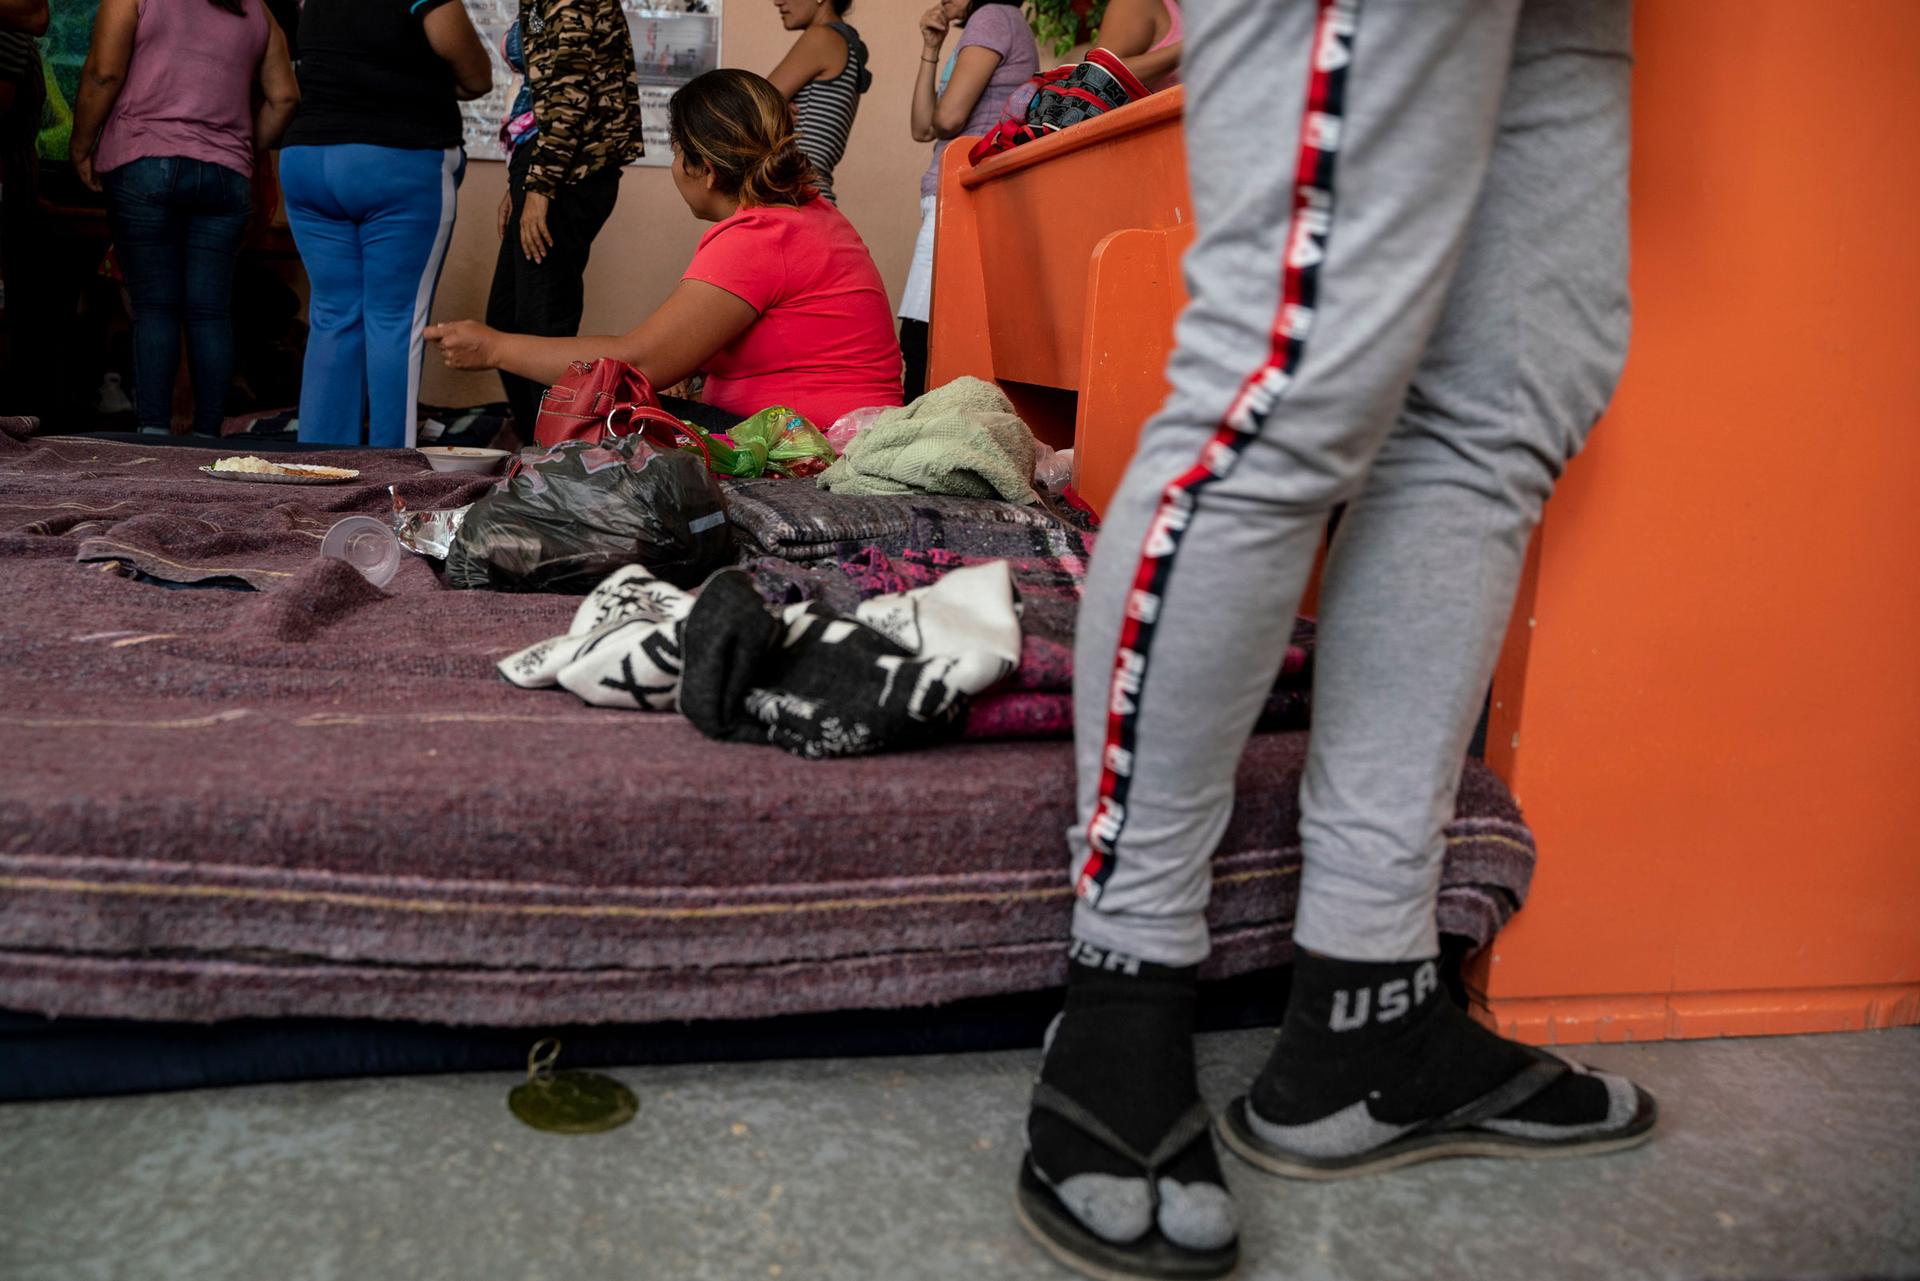 A mattress sits on the floor as people stand around a room.